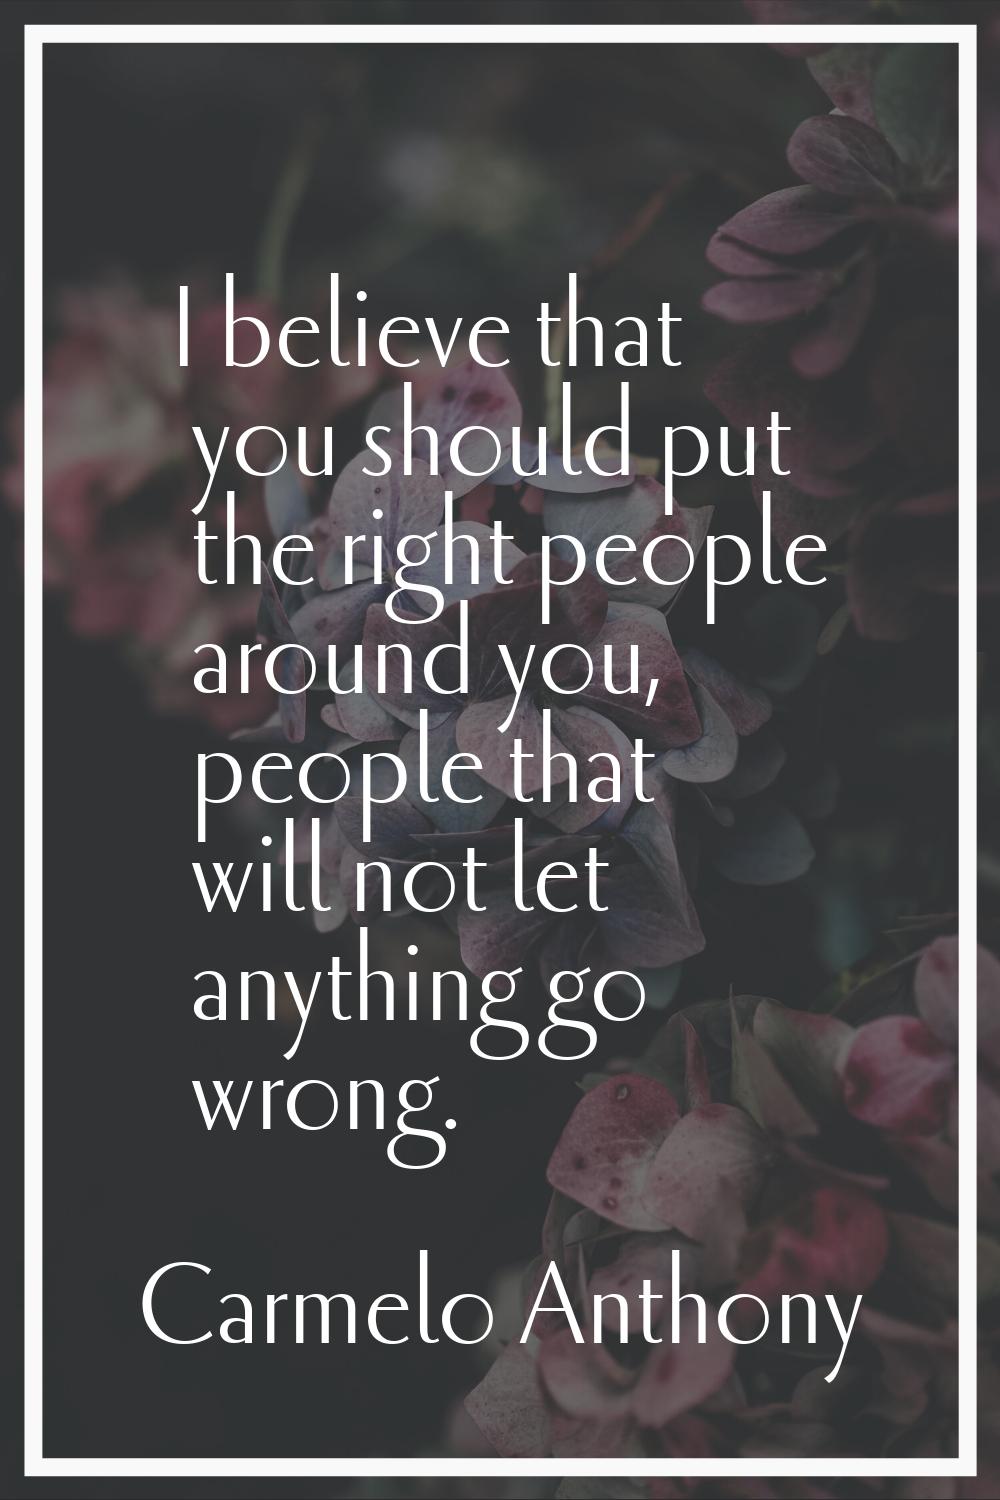 I believe that you should put the right people around you, people that will not let anything go wro